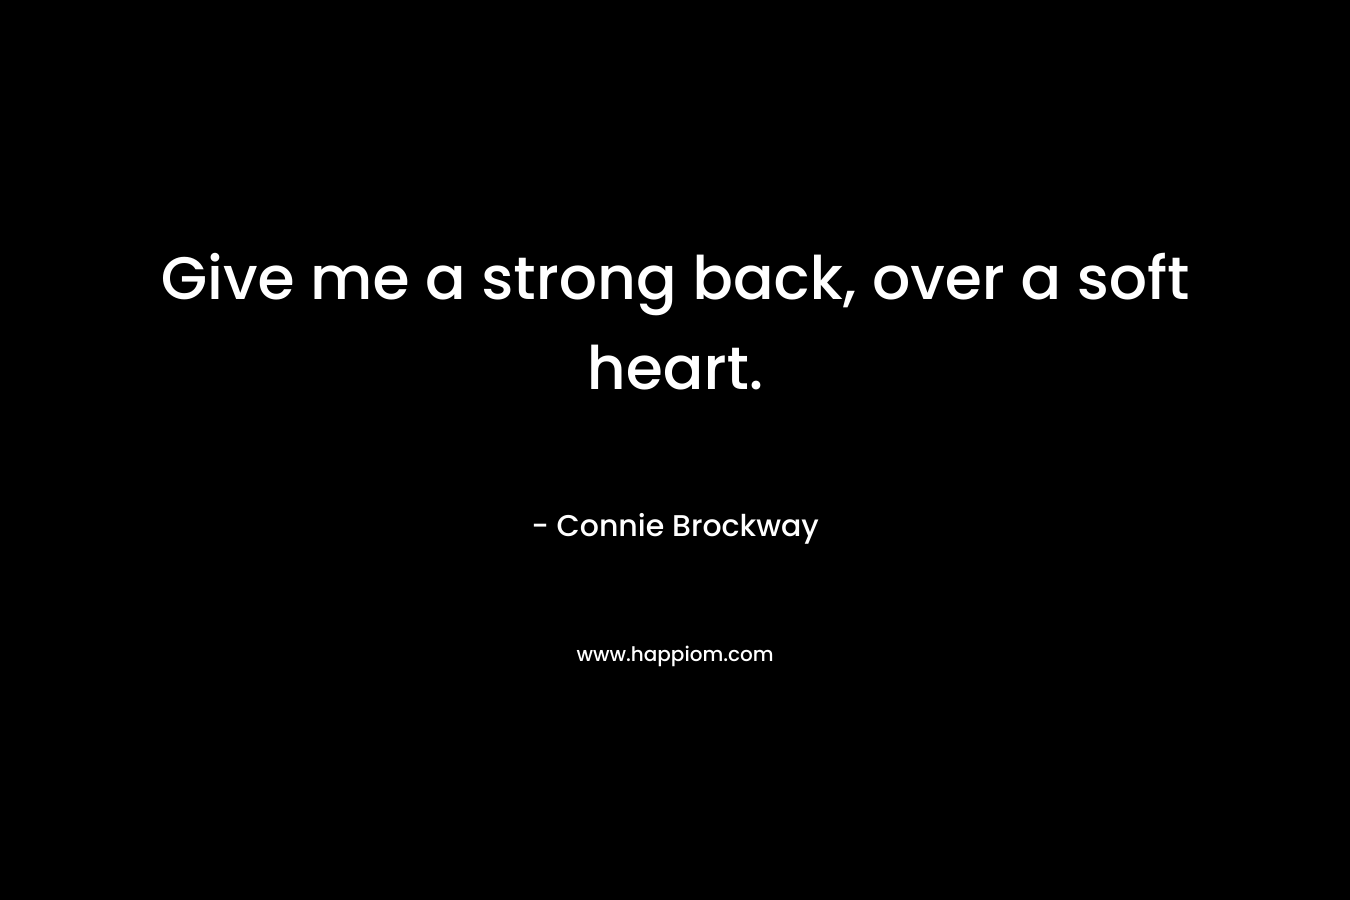 Give me a strong back, over a soft heart.